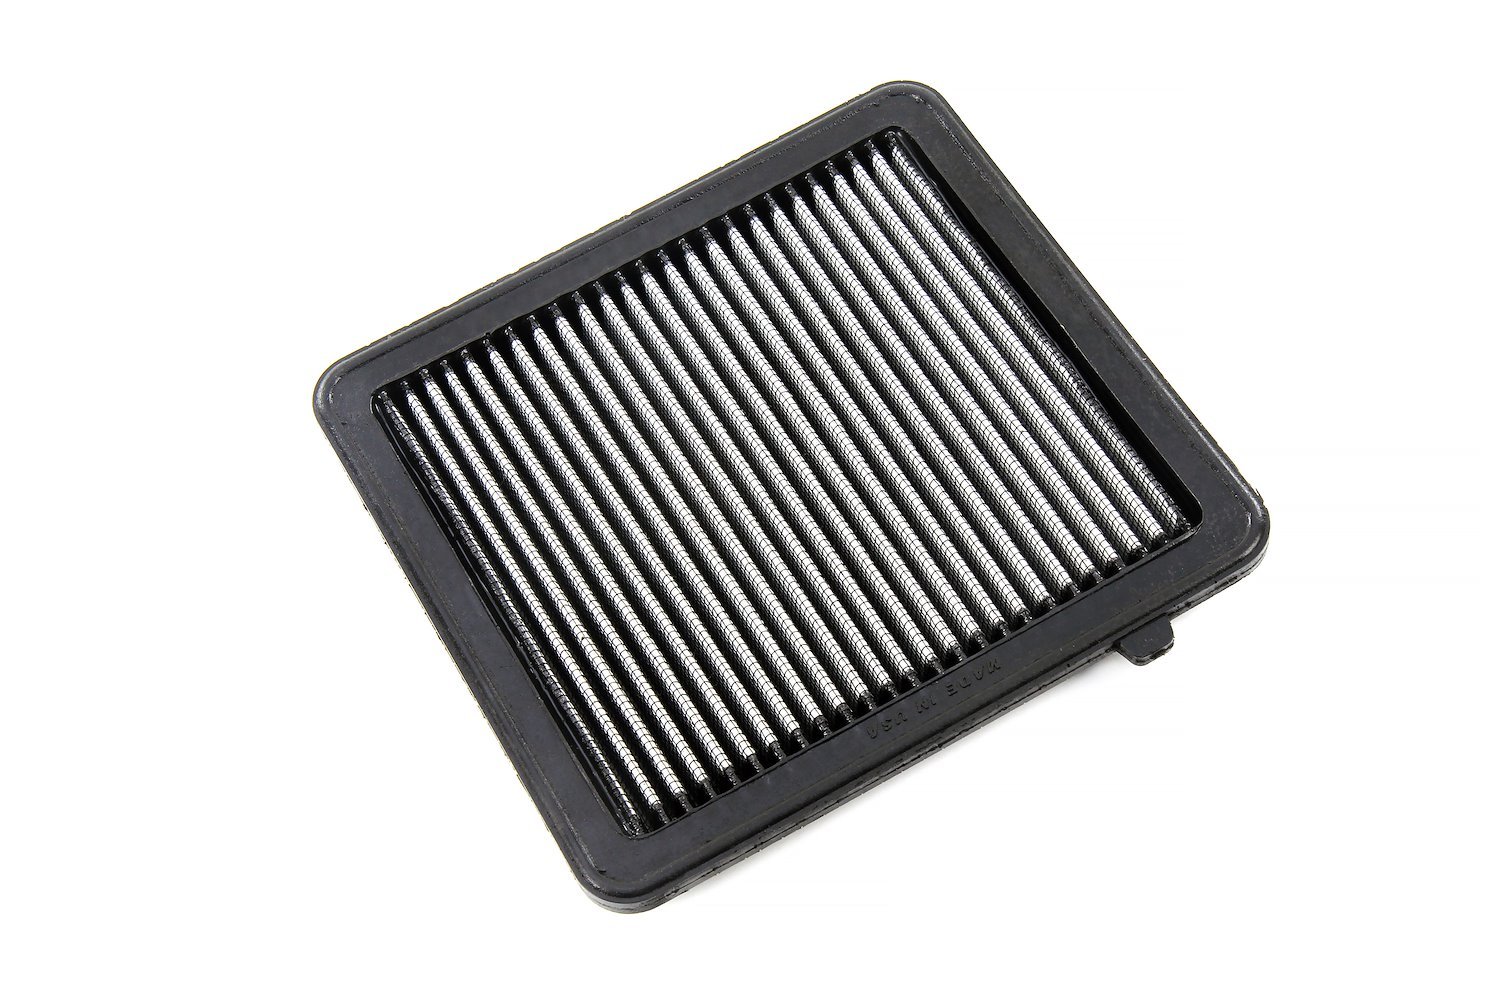 HPS-457348 Performance Drop-In Air Filter, Directly Replaces OEM Drop-In Panel Filter, Improves Performance & Fuel Economy